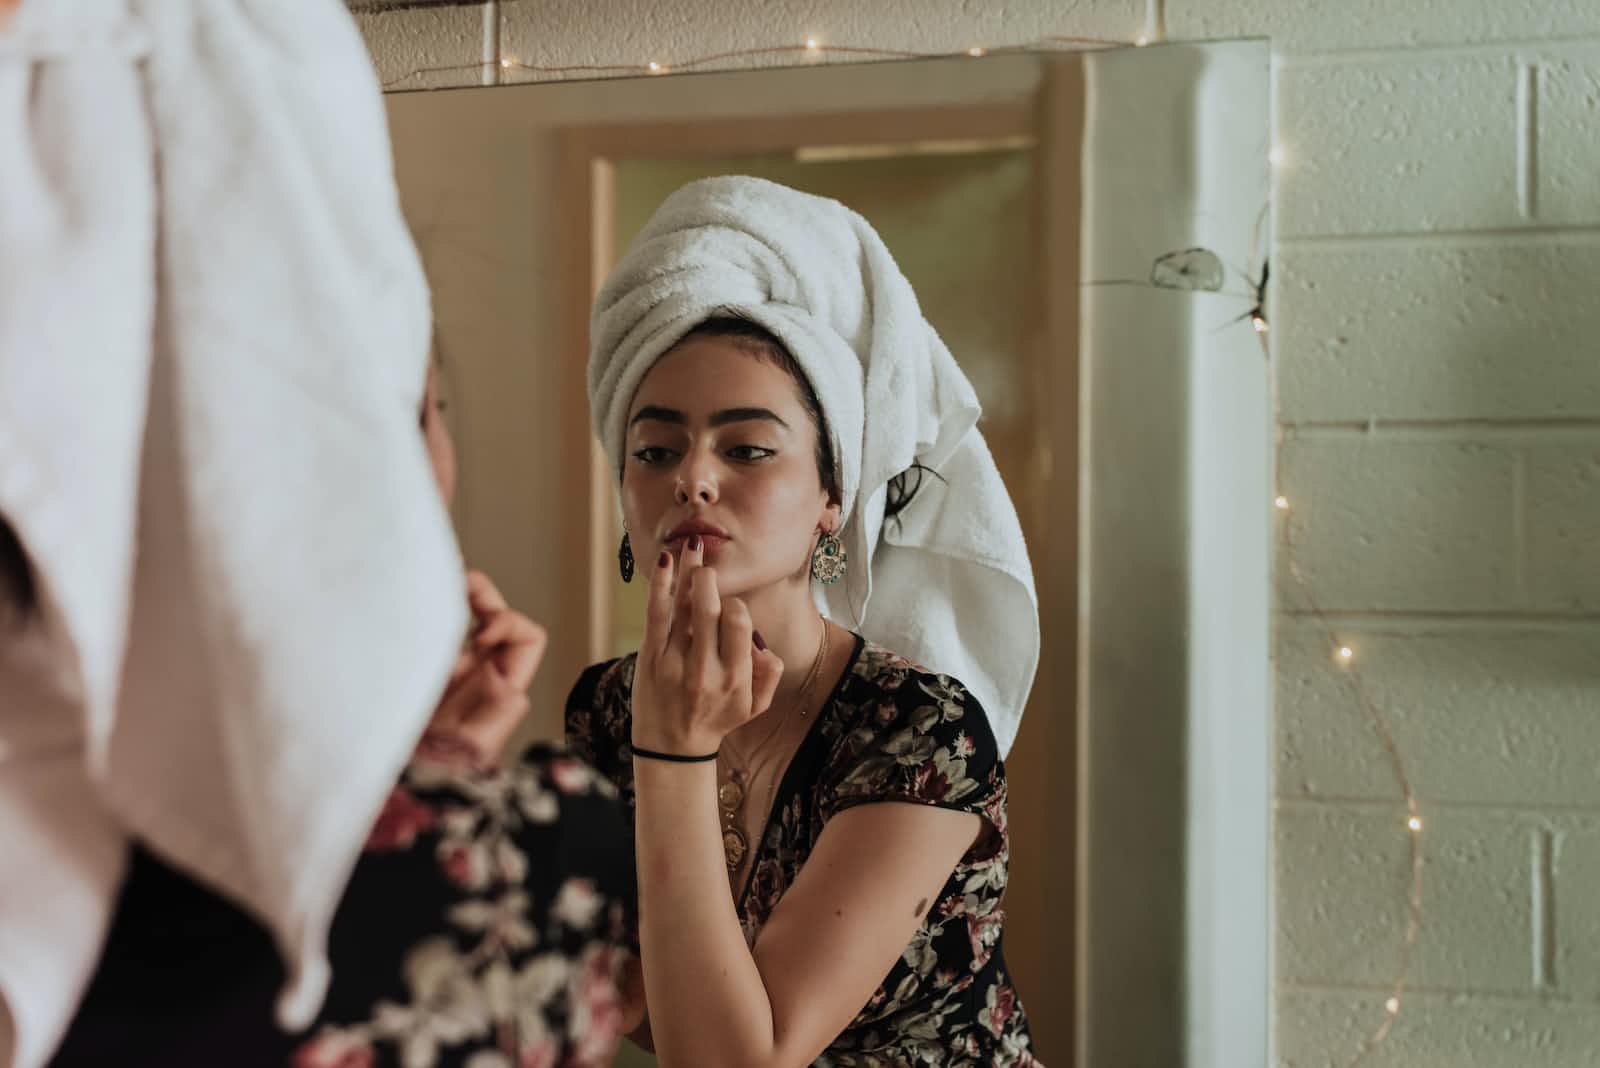 A woman putting on makeup in front of a mirror